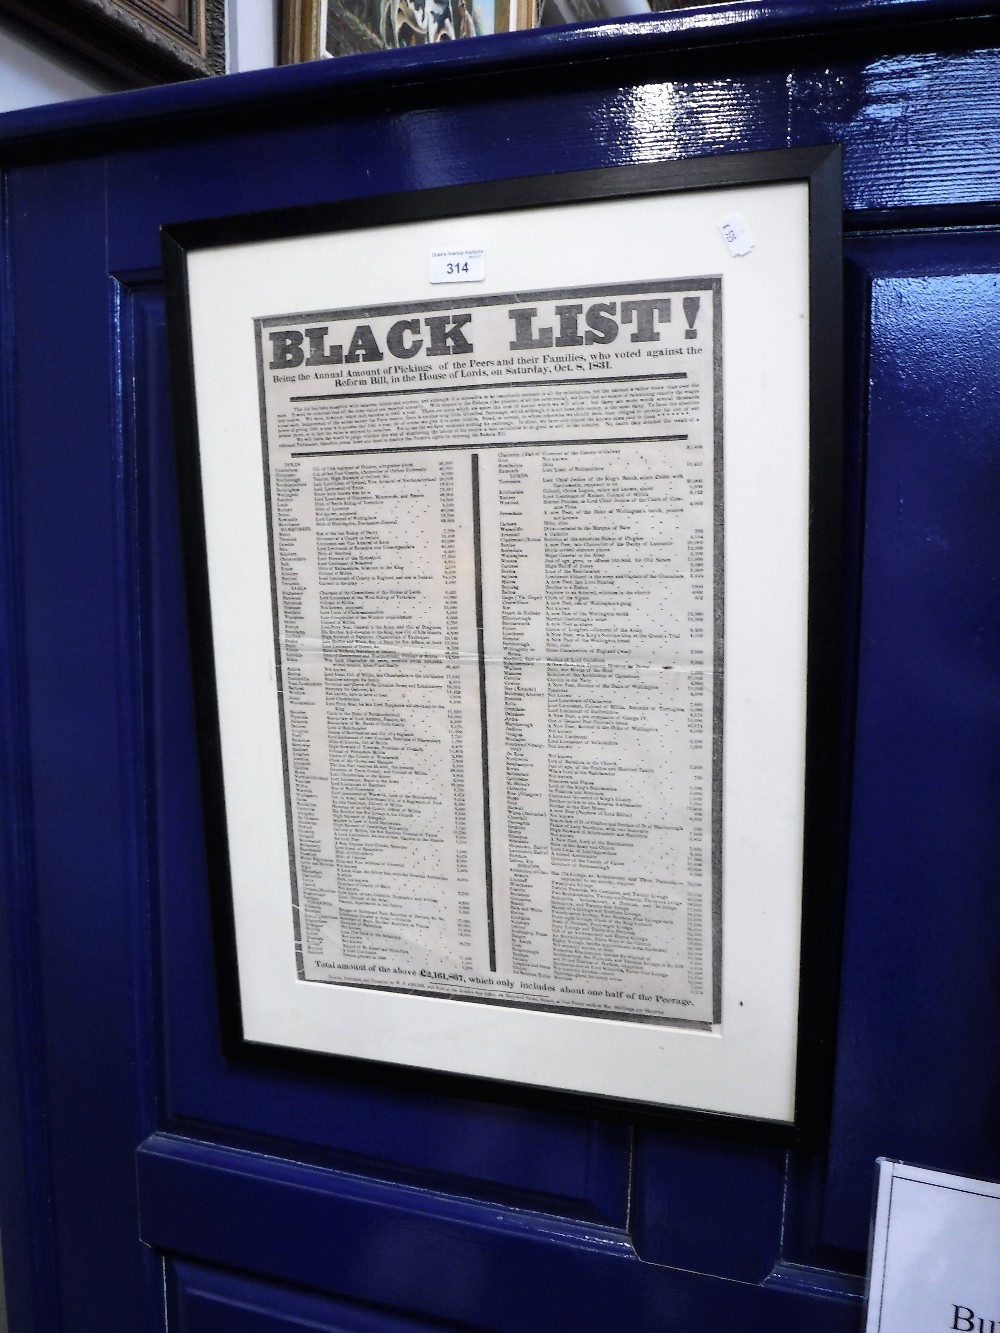 A 19TH CENTURY REFORM BILL POSTER; 'BLACK LIST!... the peers ...who voted against the Reform